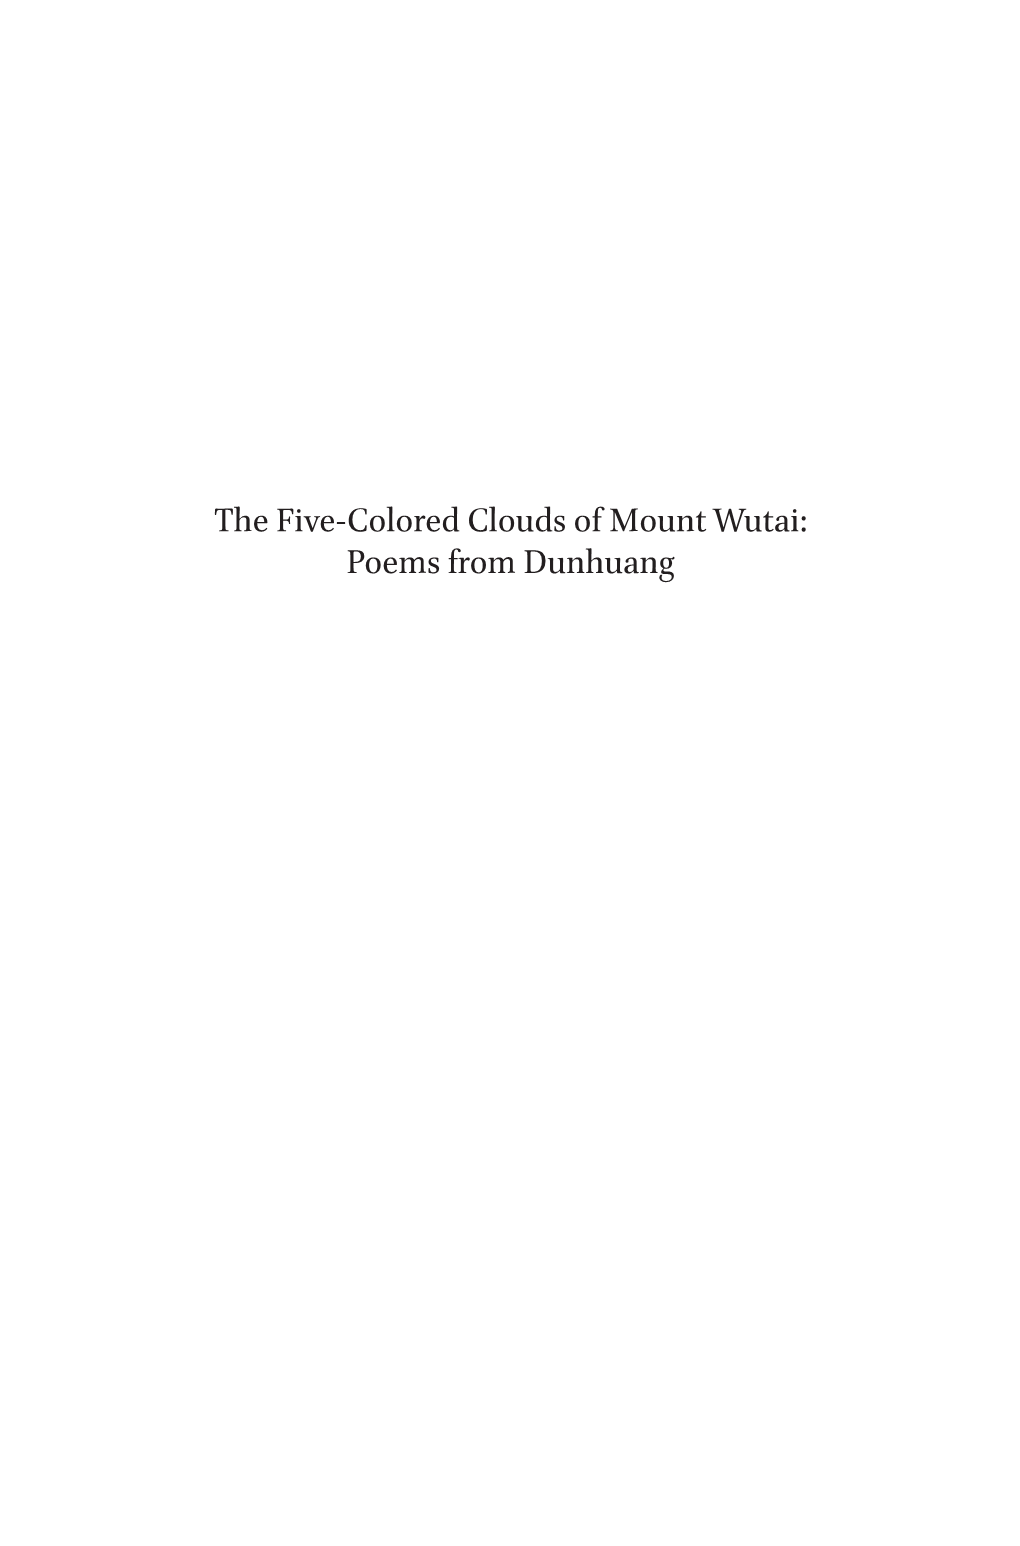 The Five-Colored Clouds of Mount Wutai: Poems from Dunhuang Sinica Leidensia